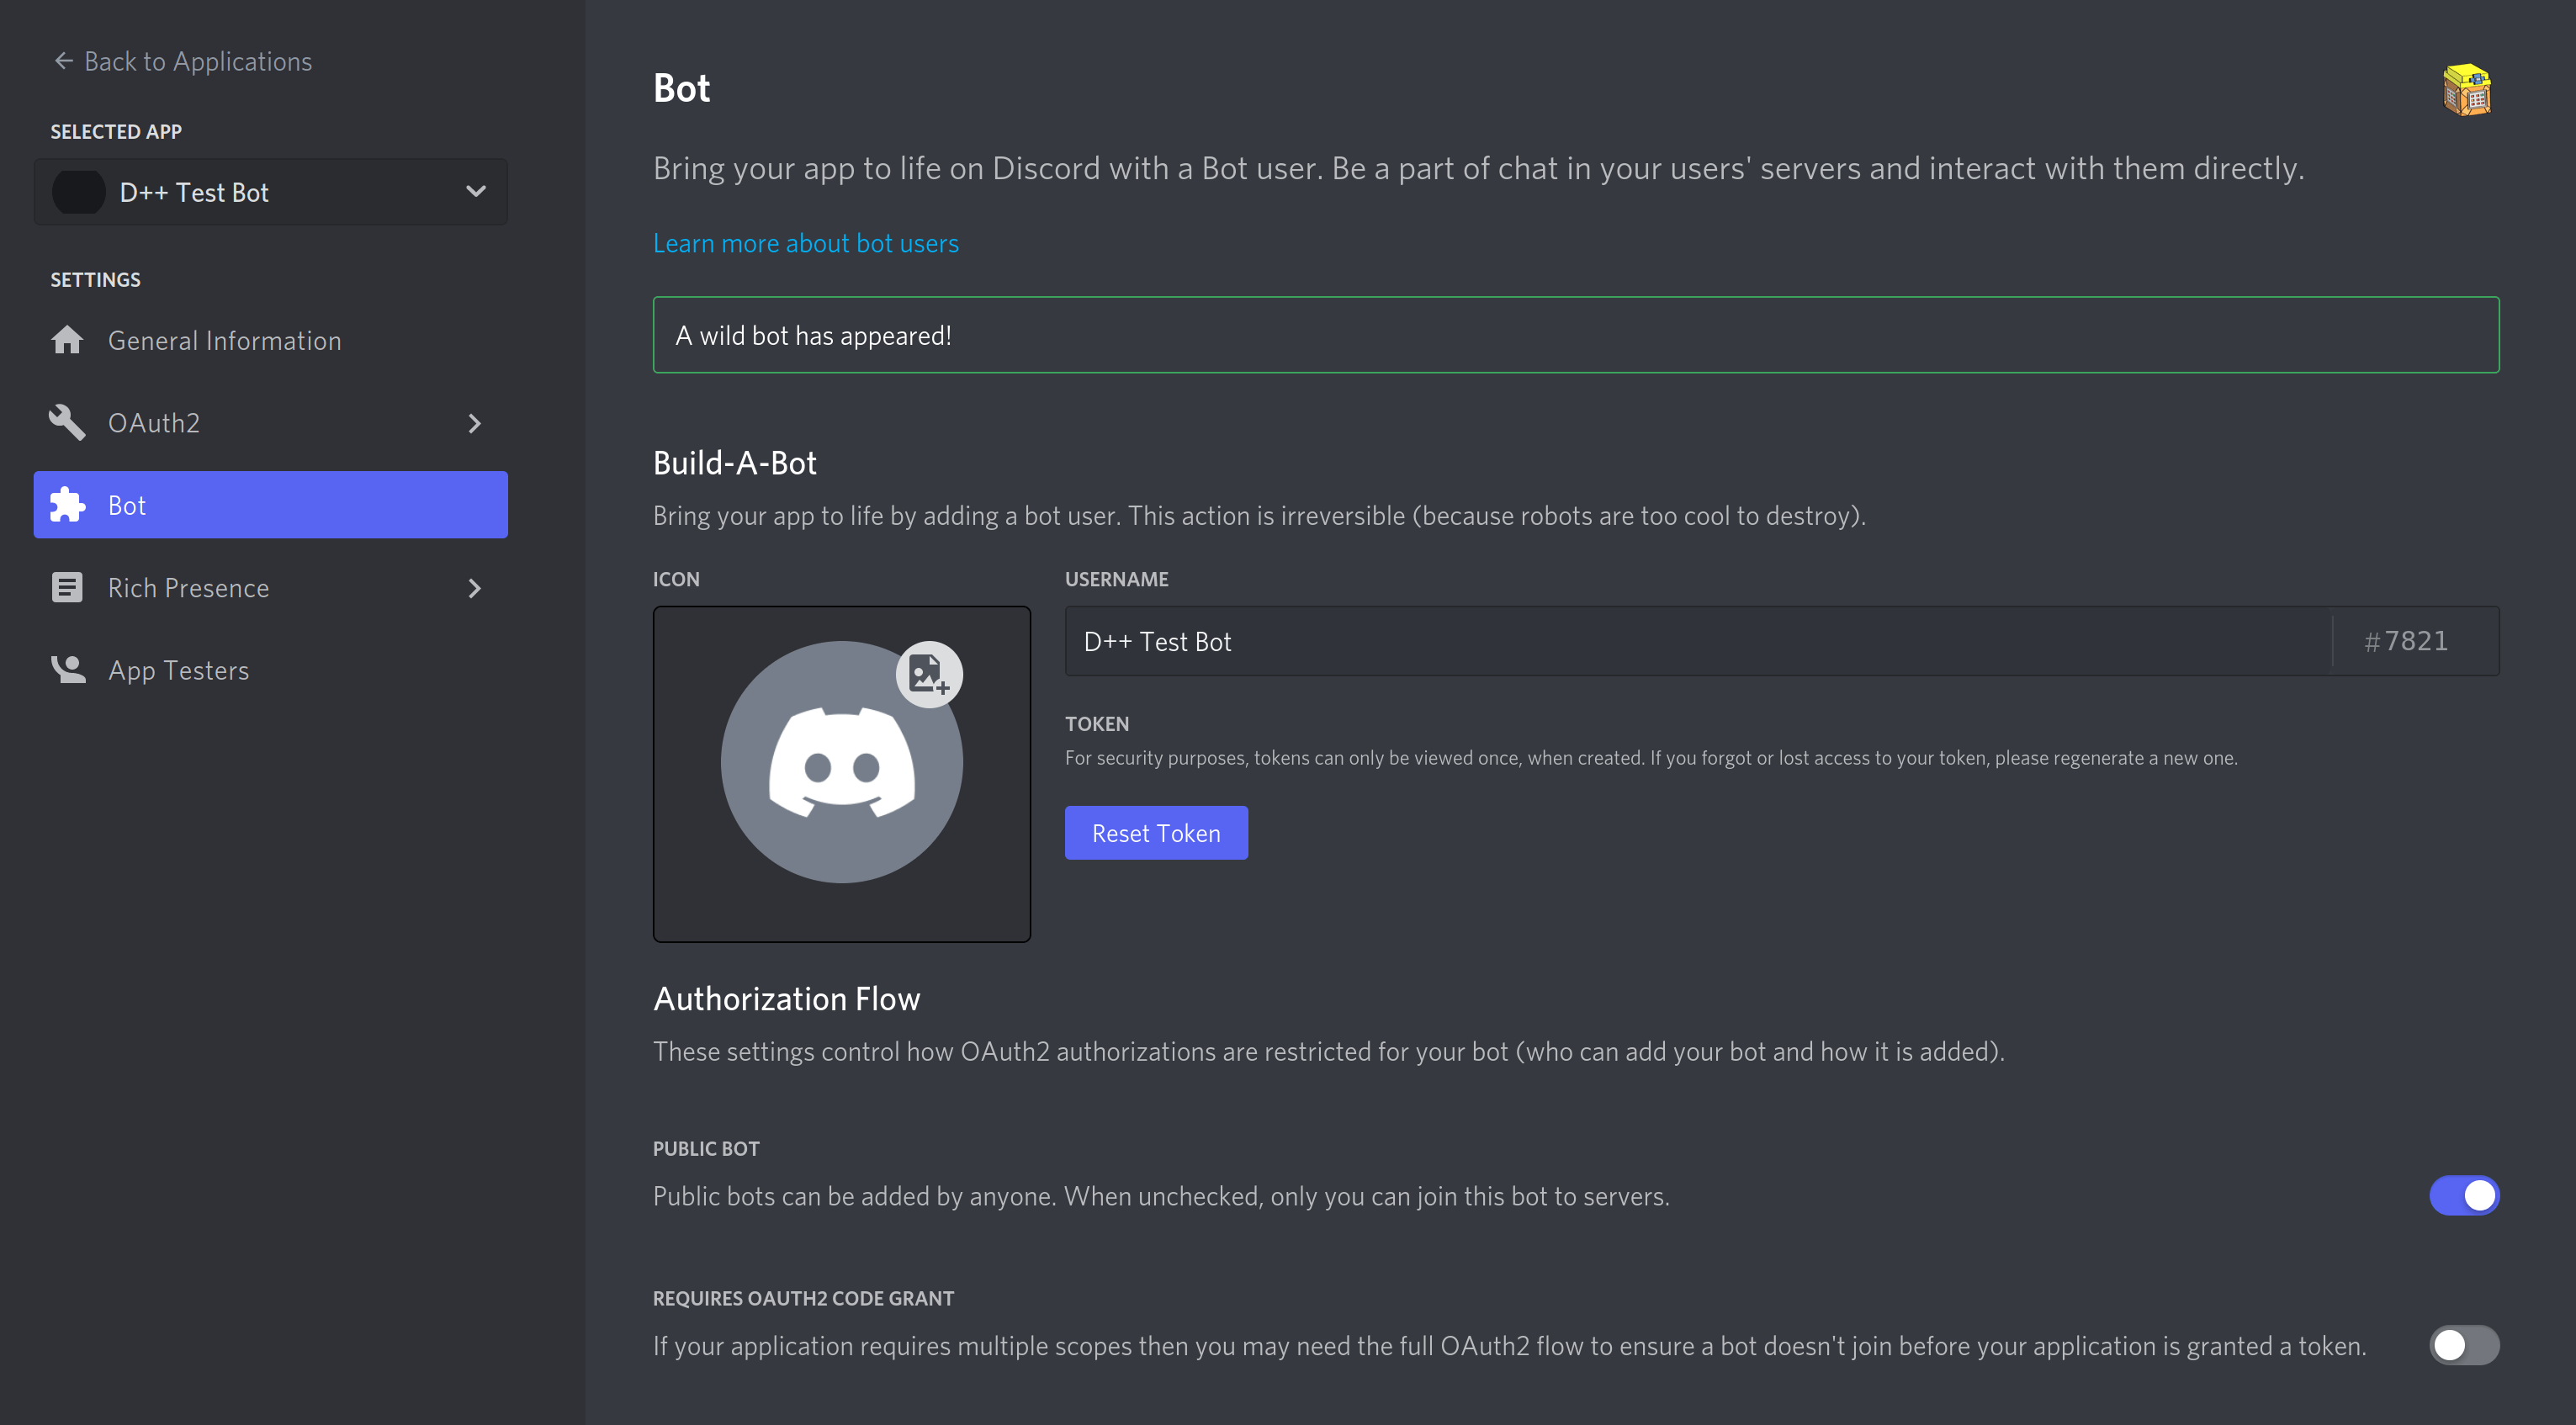 Make Your Discord Profile Shine Profile Pointers from Design Pros